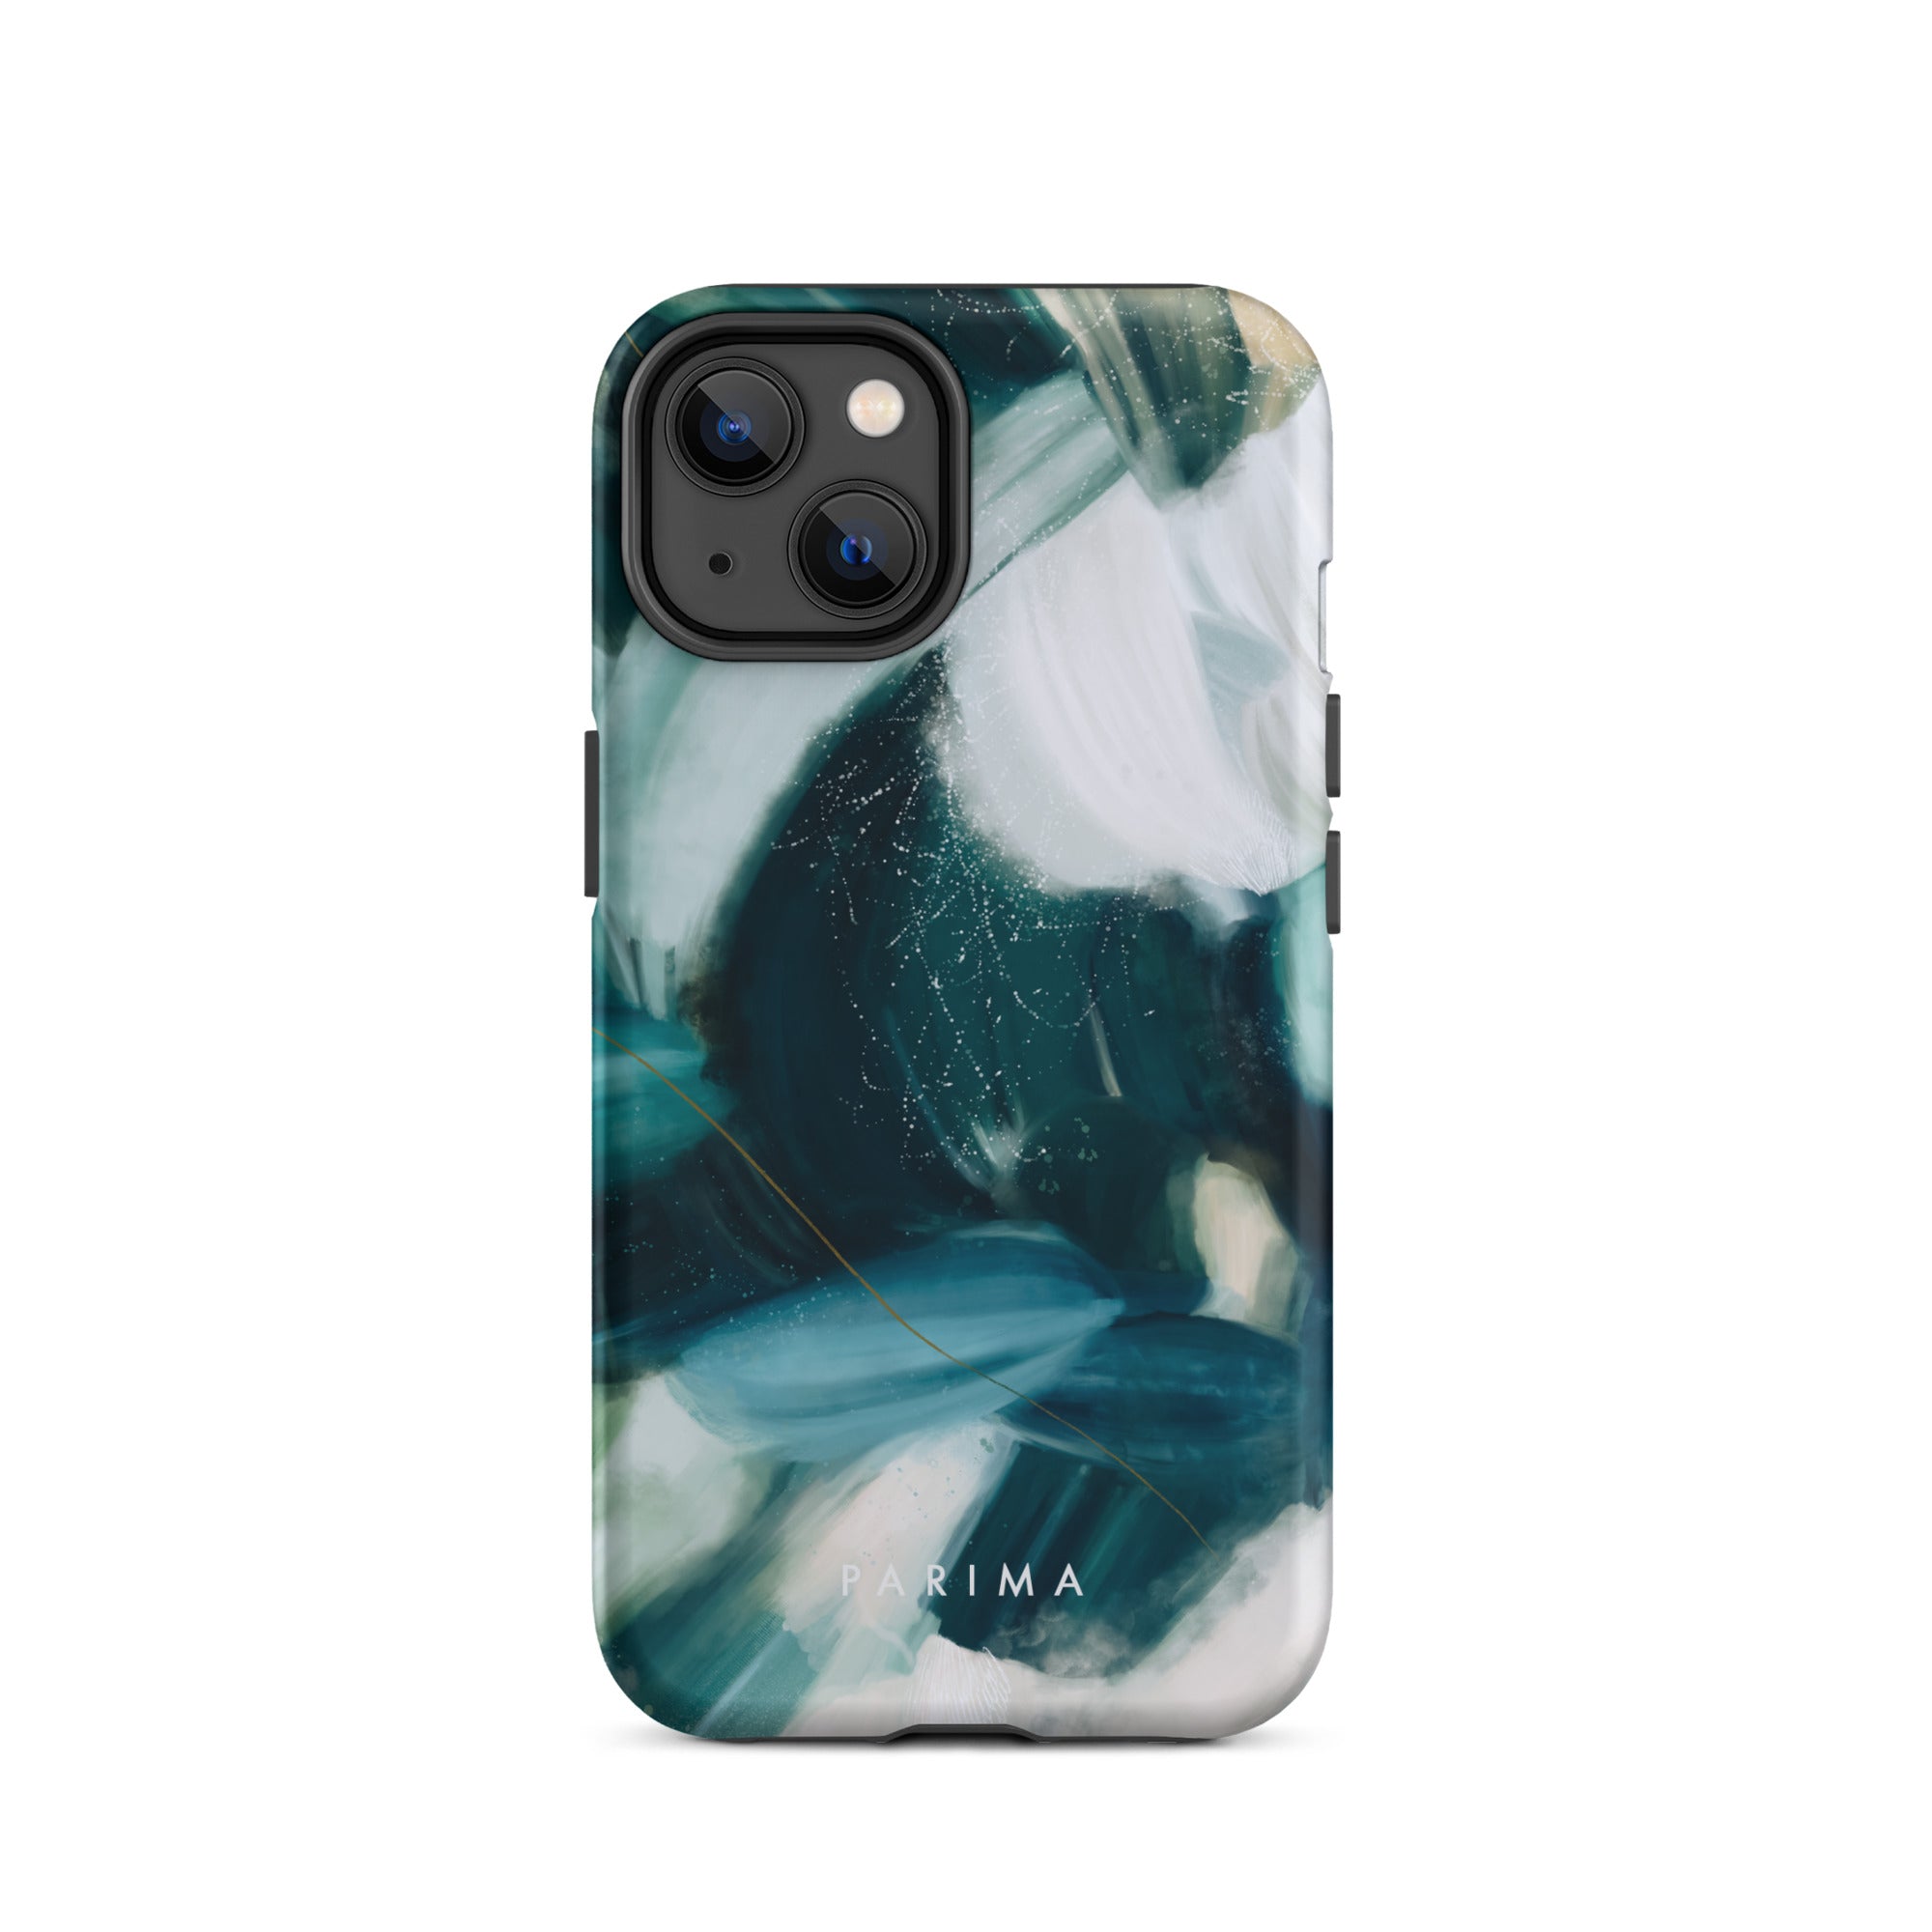 Caspian, green and blue abstract art - iPhone 14 tough case by Parima Studio